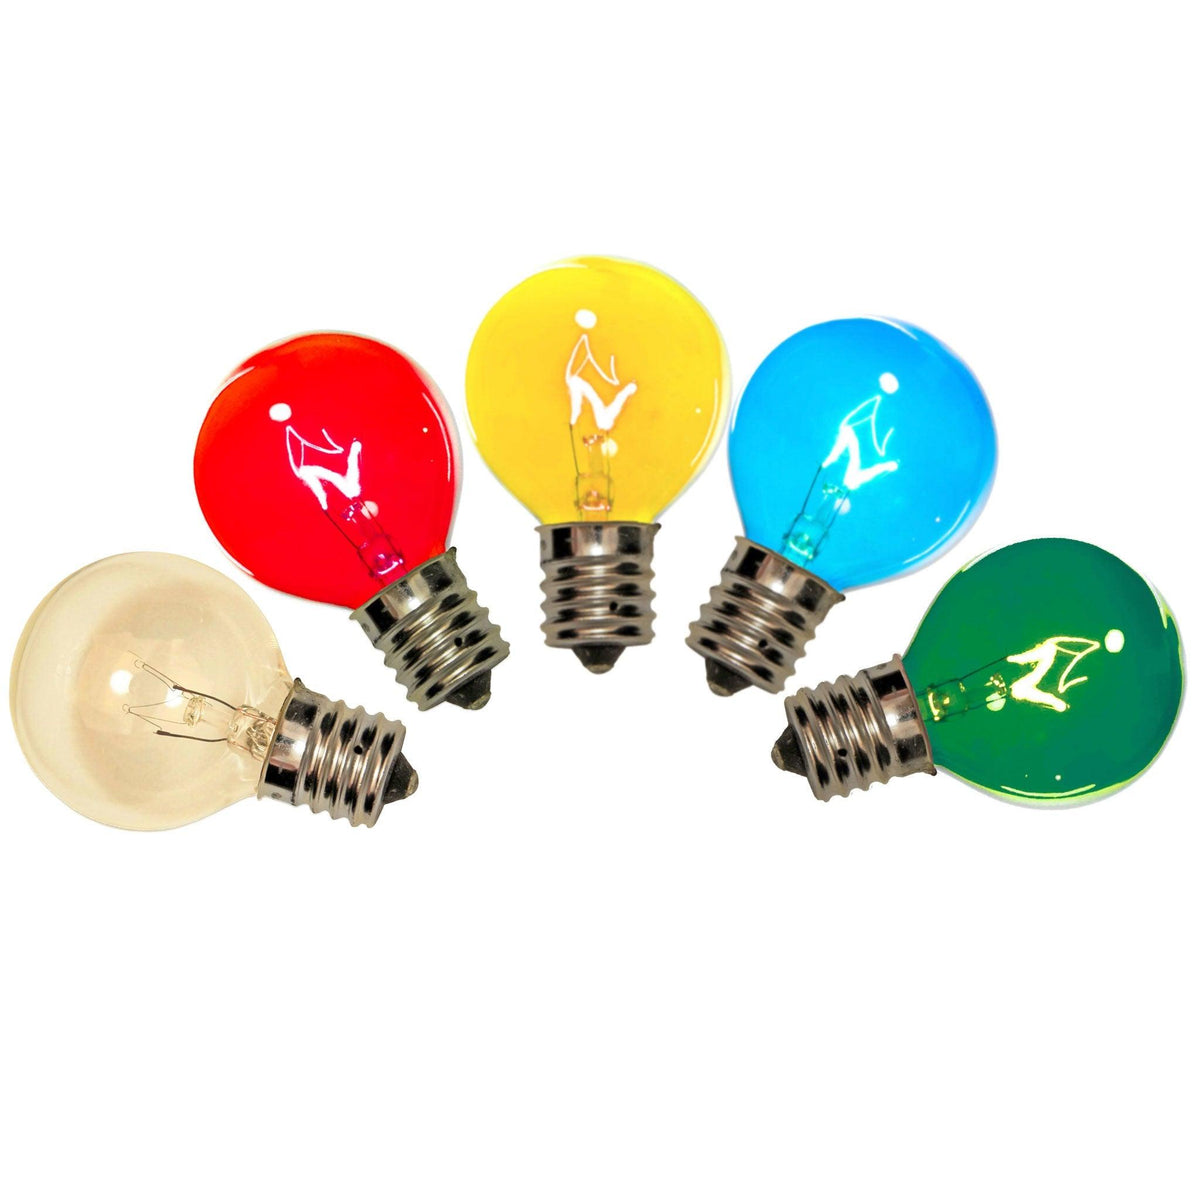 1 Box of 25 of brand new transparent Multi-Color G40 Globe Light Bulbs Replace your old bulbs today at leedisplay.com